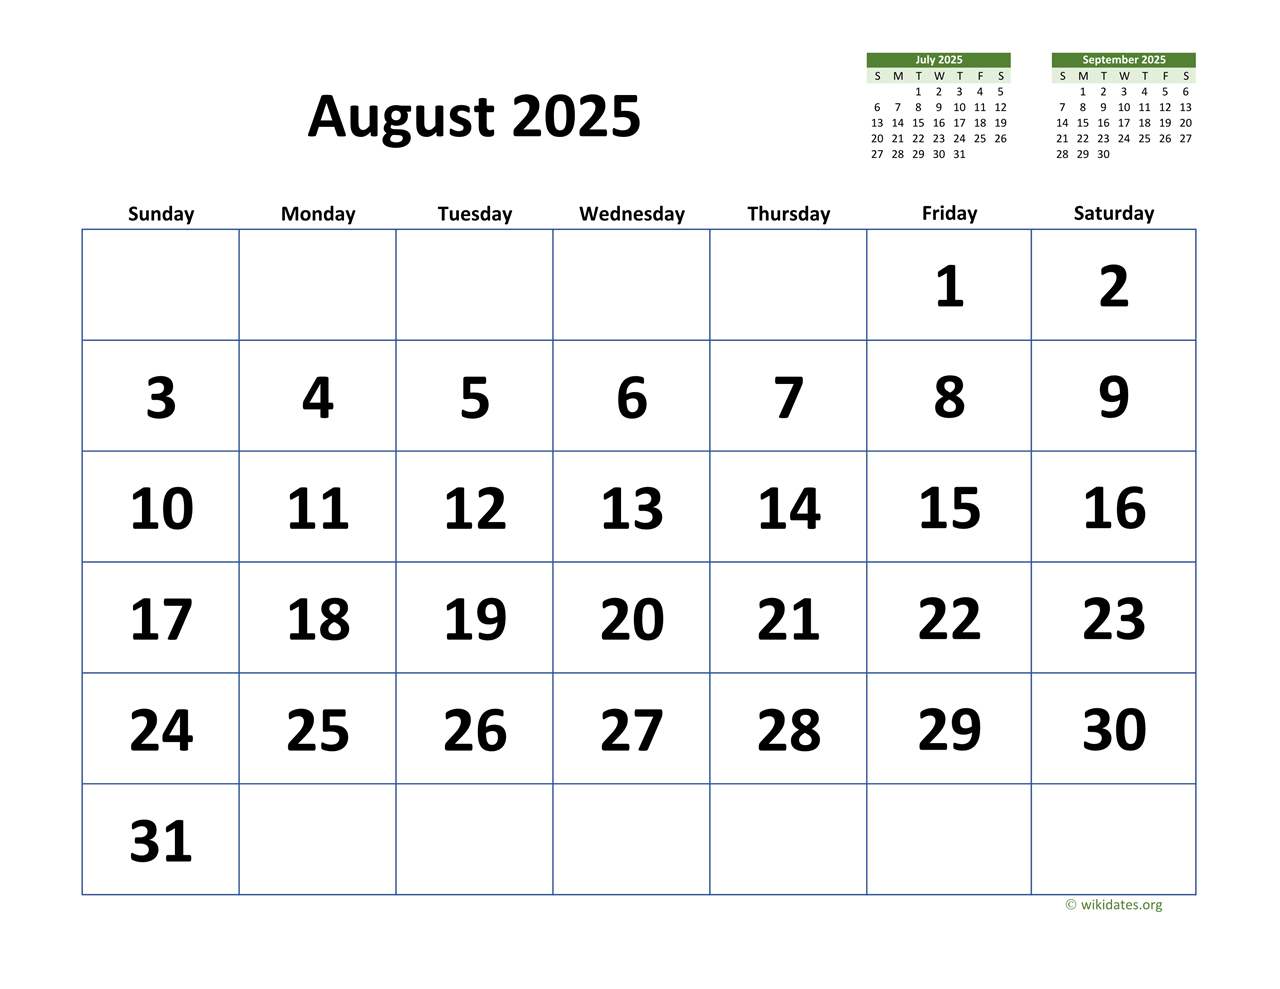 August 2025 Calendar with Extra-large Dates  WikiDates.org